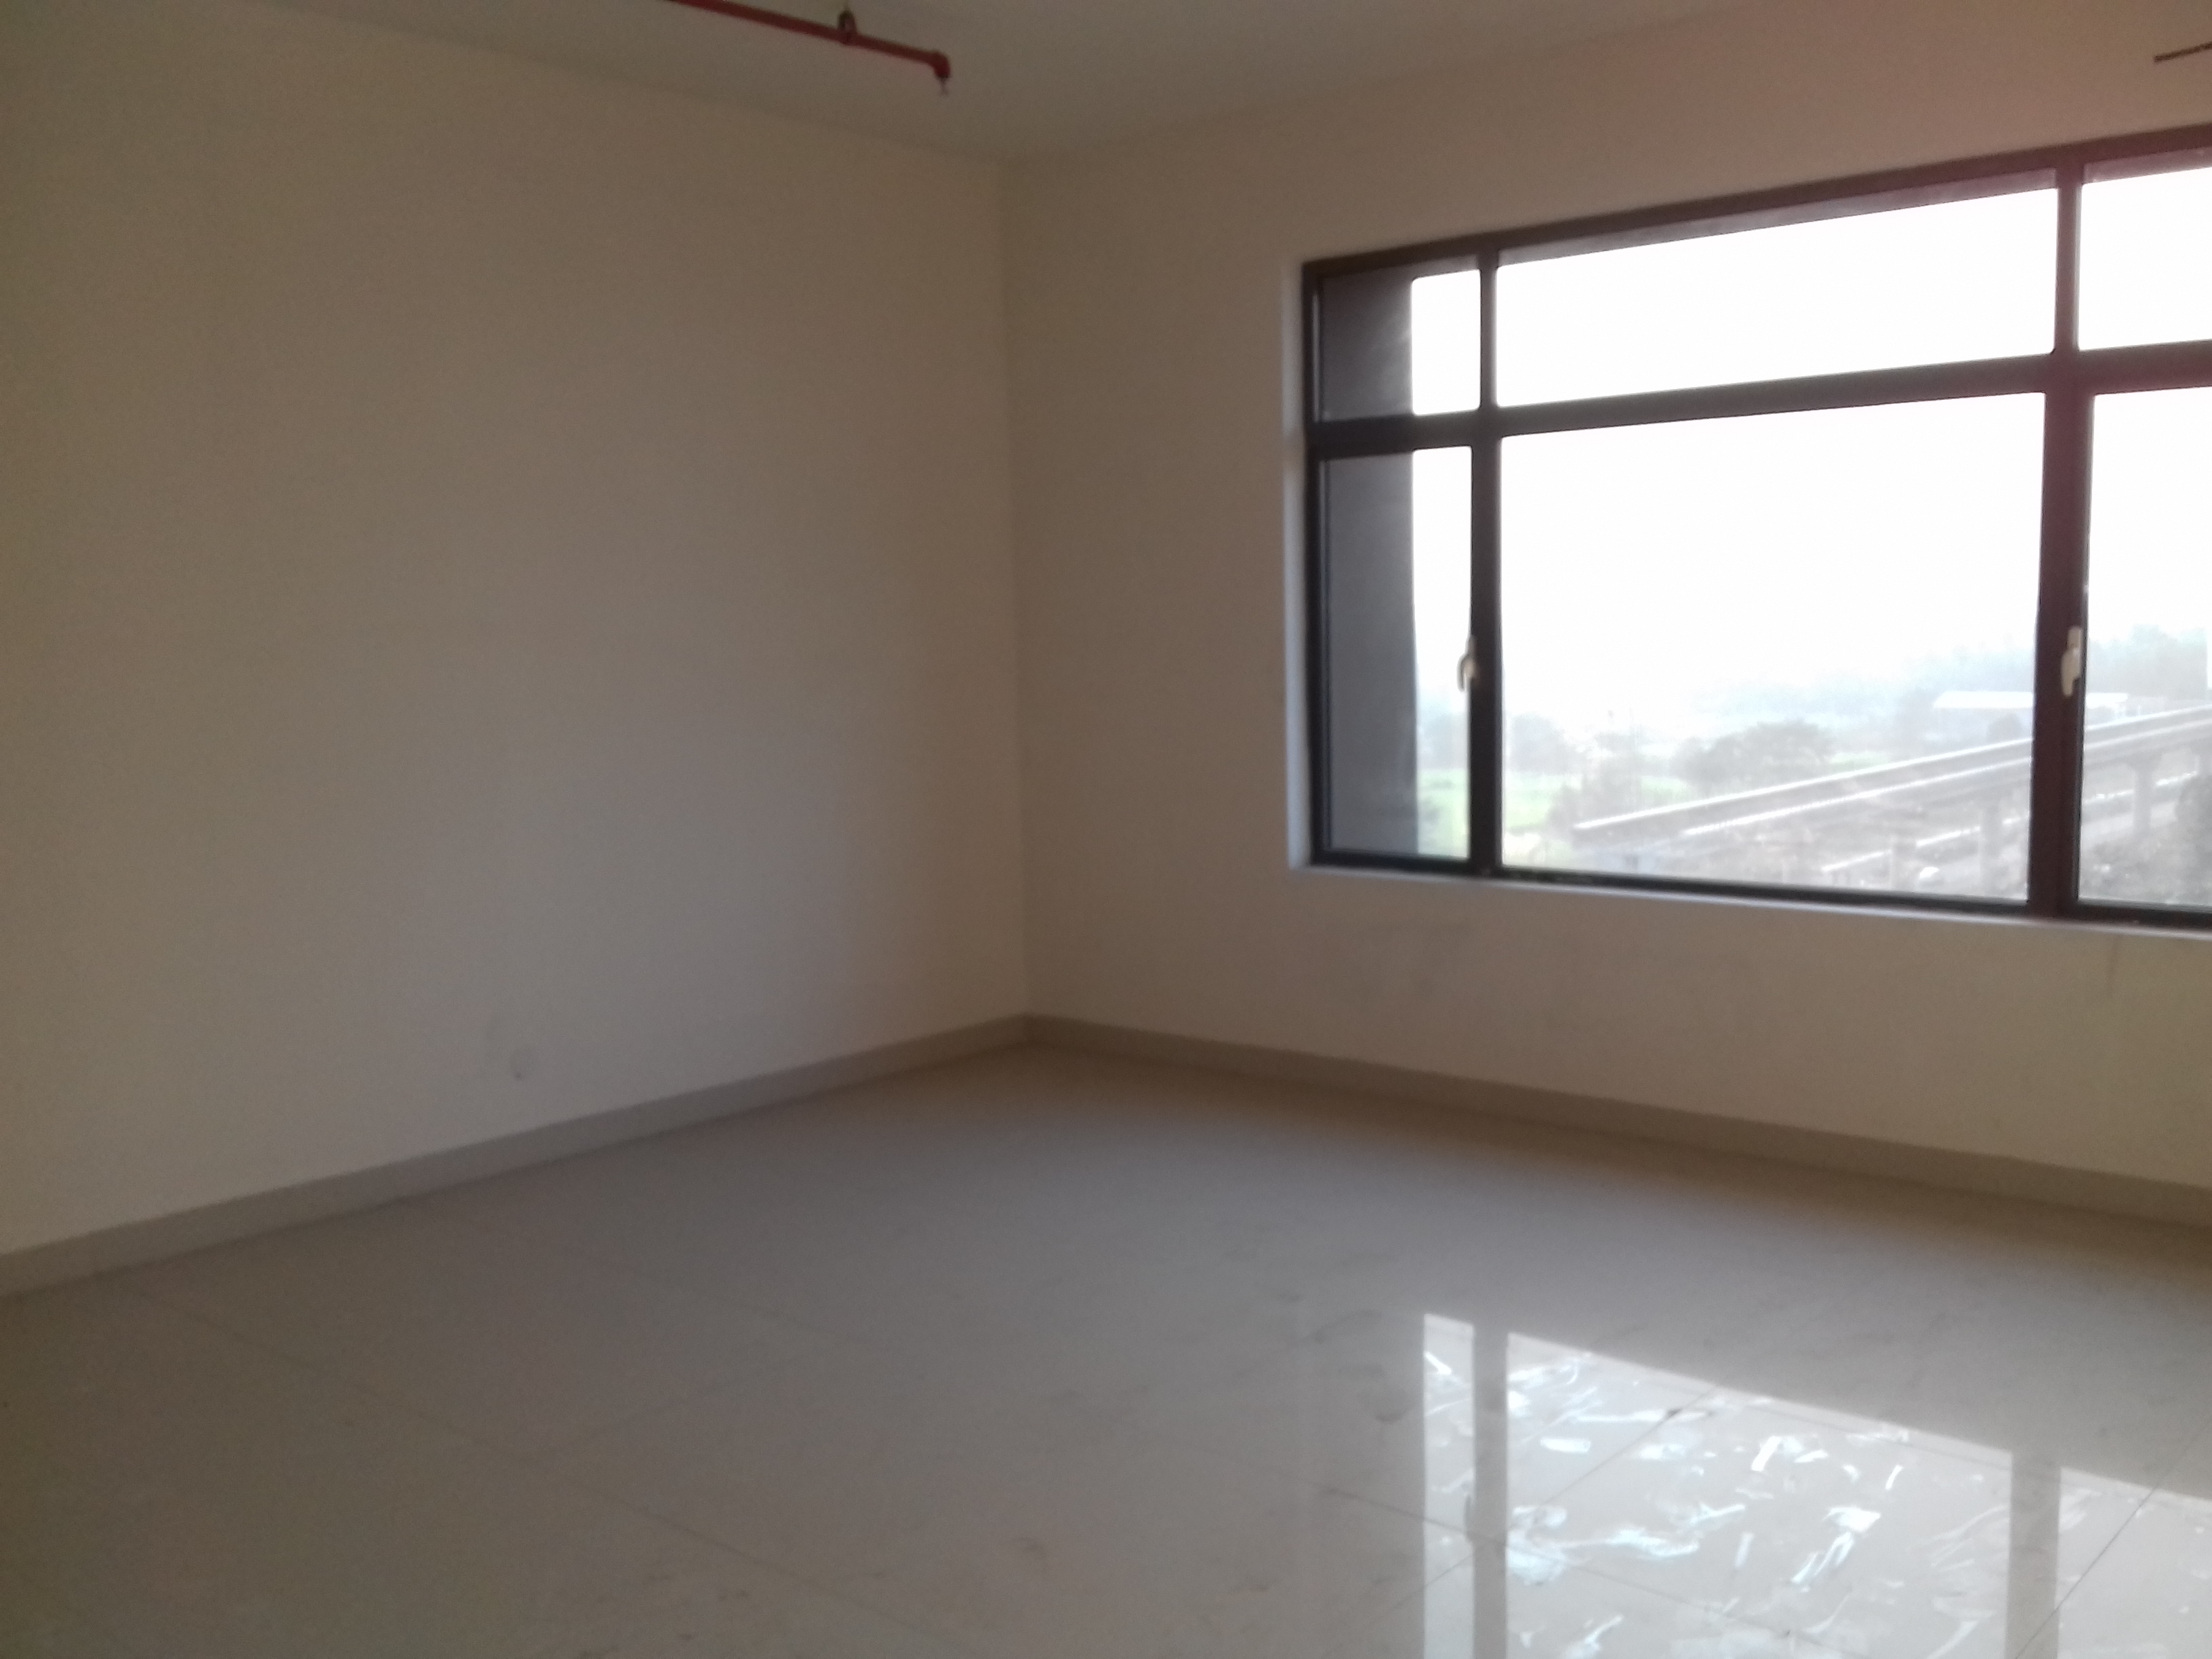 Office For Rent in New Town,Kolkata (Id:9456)